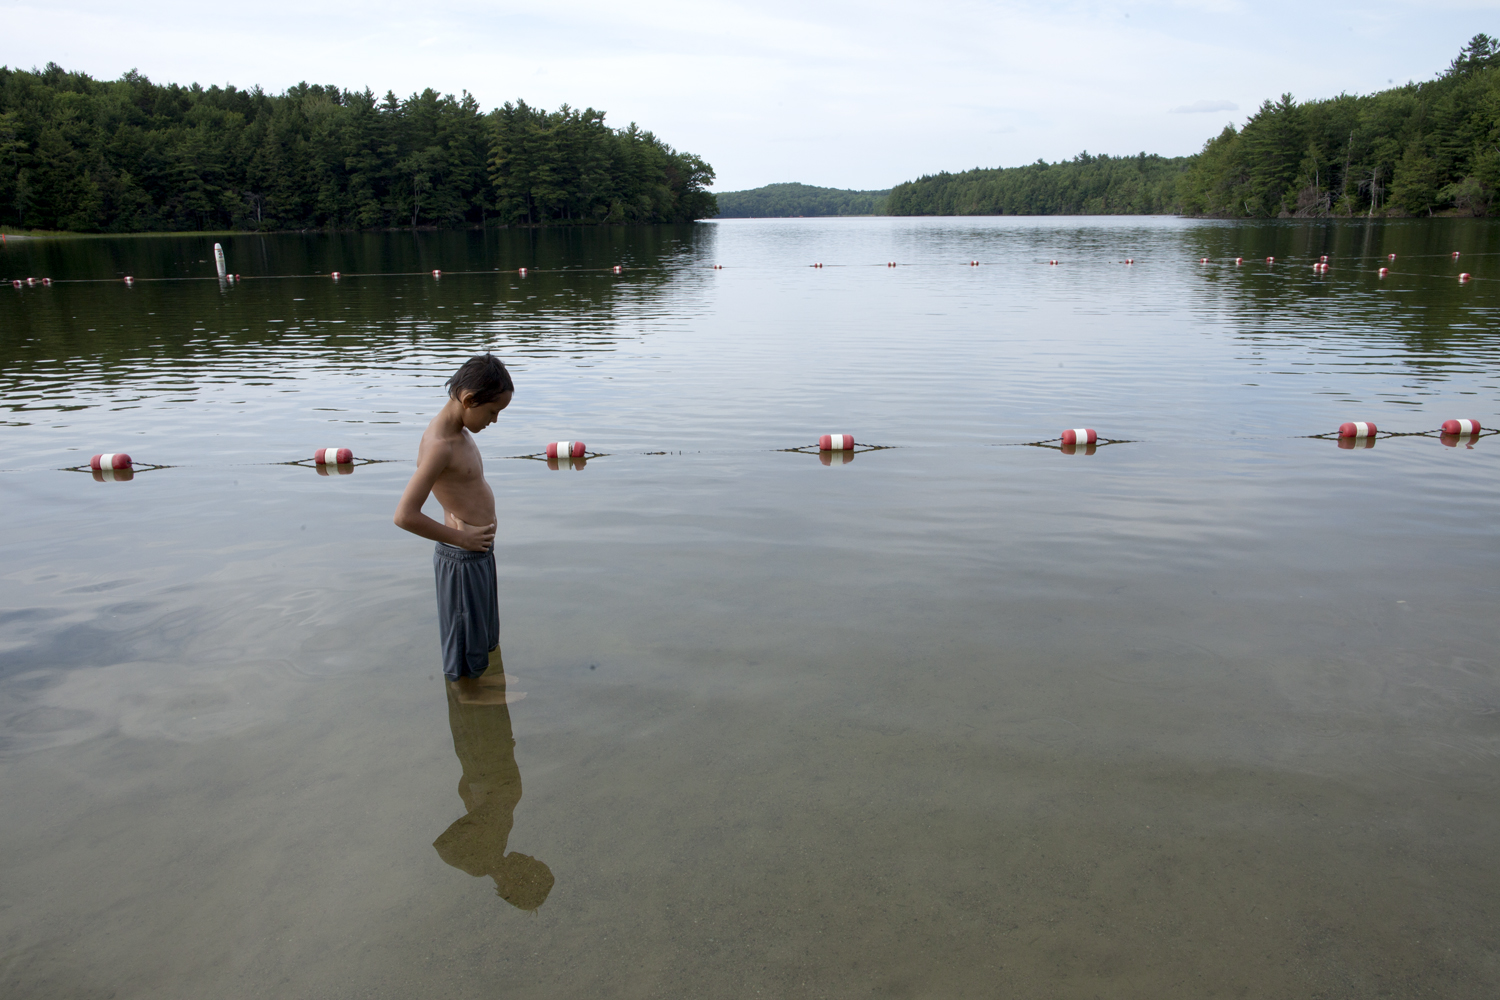 Donny stands in Grafton Lake waiting for fish to bite his feet. The fact that he is able to stand quiet and still–something that would have been inconceivable a year ago–is a testament to the special year-round school program that he has been attending since the winter. July 2012.